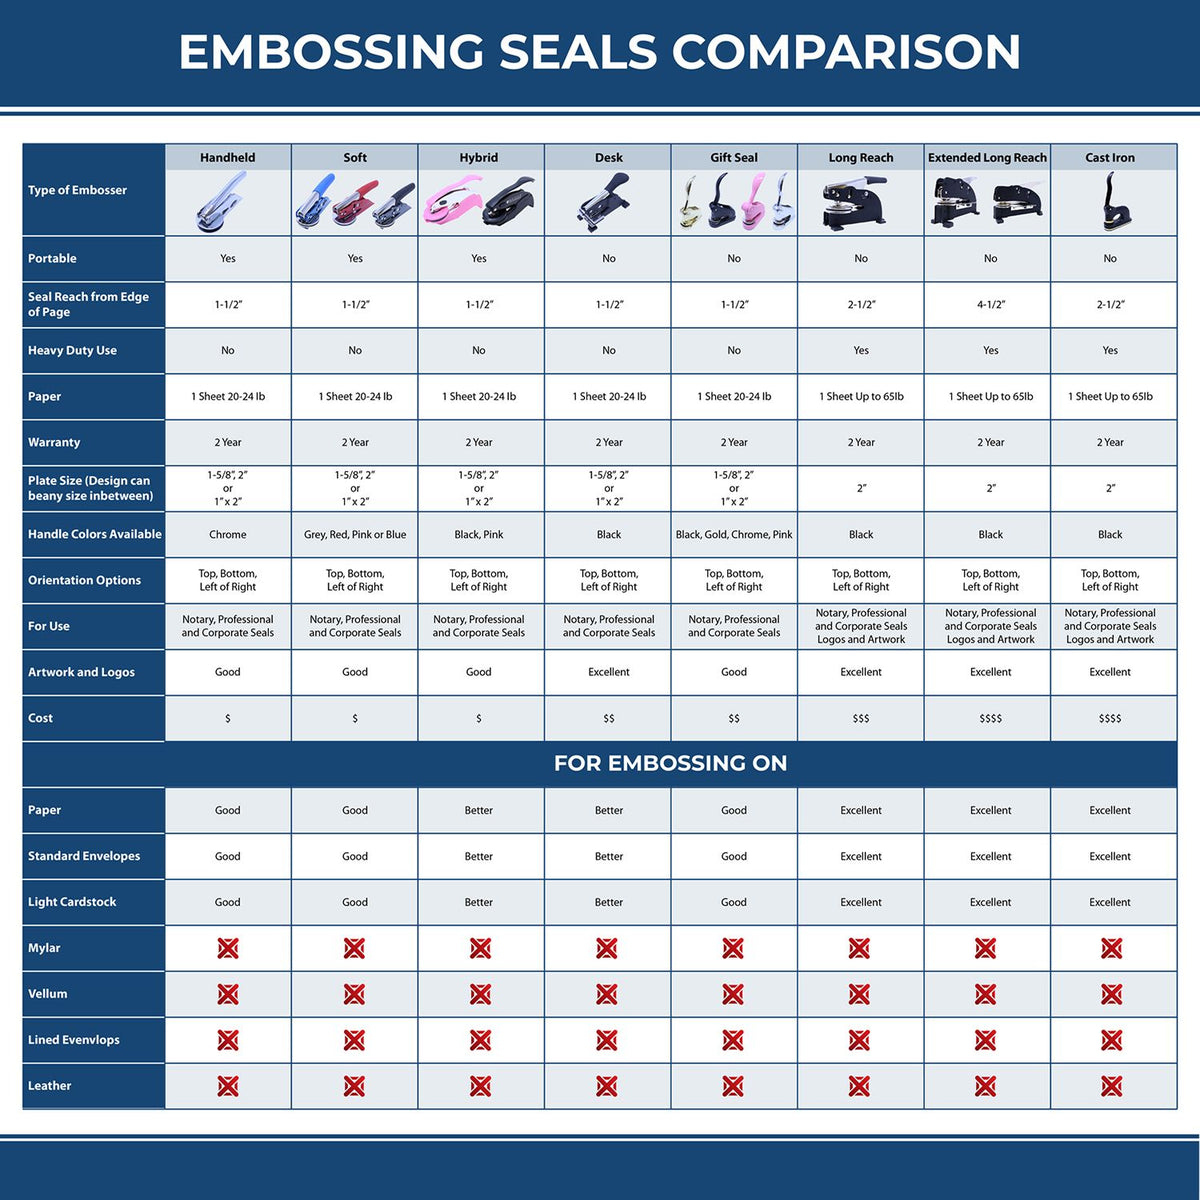 A comparison chart for the different types of mount models available for the Heavy Duty Cast Iron Tennessee Geologist Seal Embosser